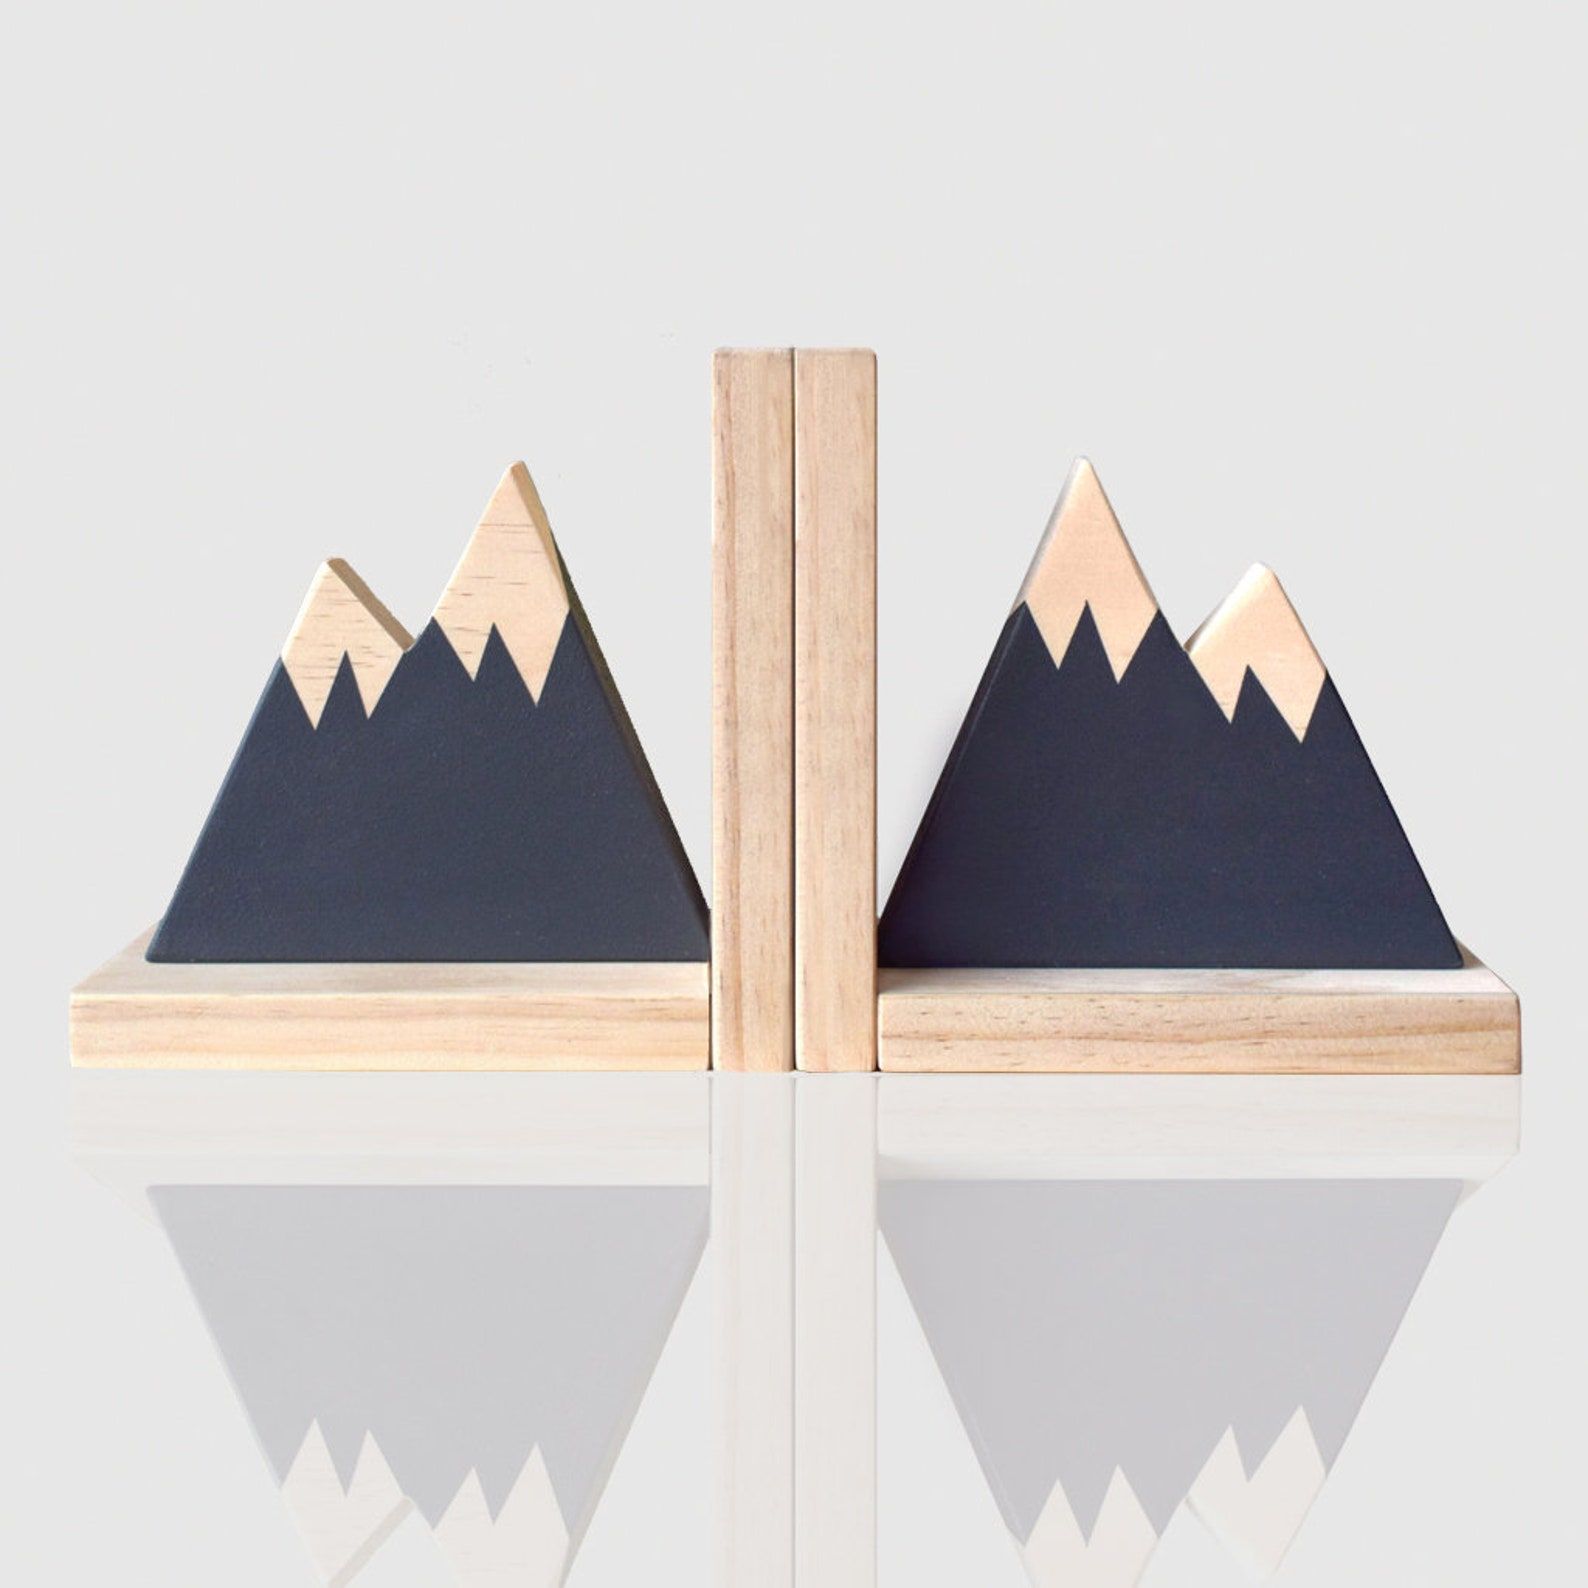 Two wooden bookends in the shape of mountain peaks. The mountains are painted navy blue while the peaks and base are a natural wood finish.